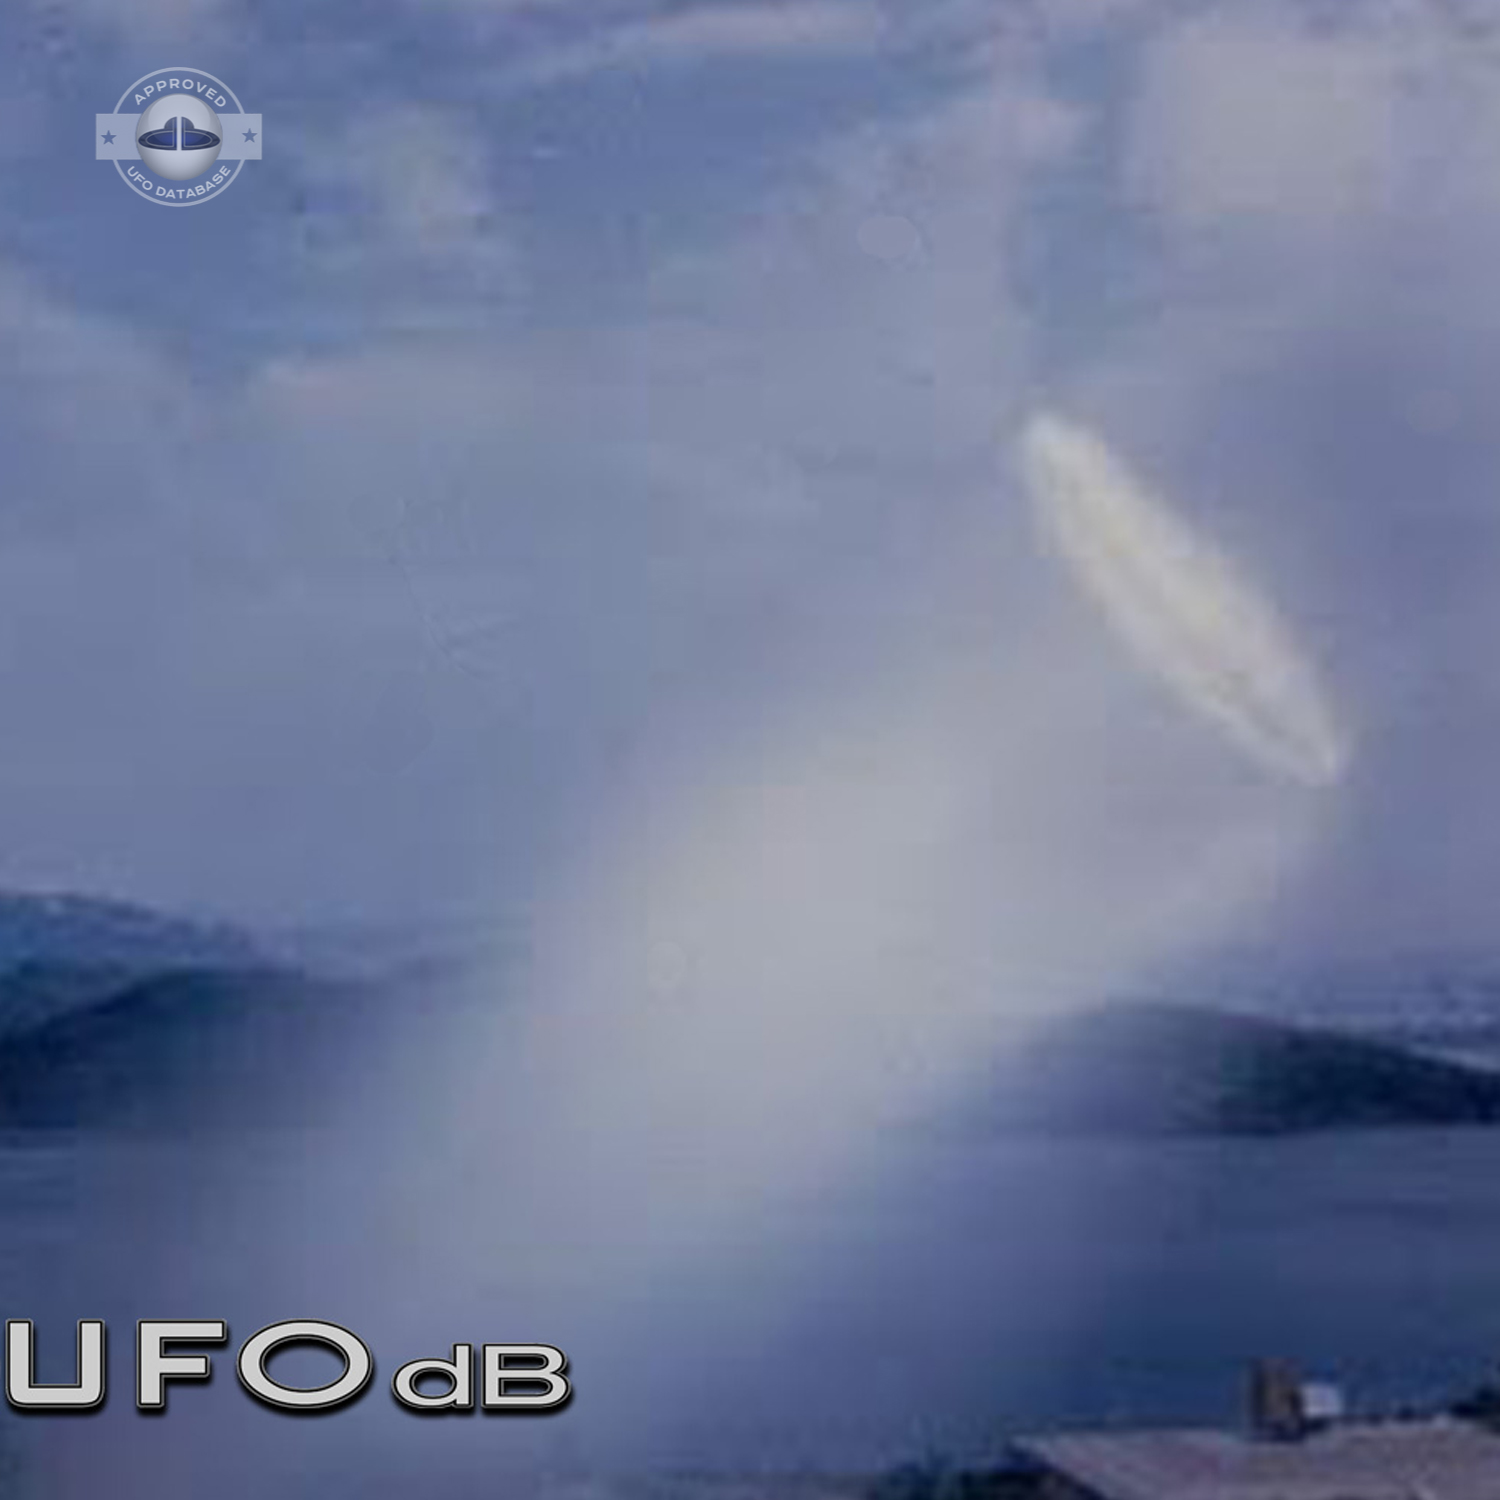 UFO almost sideways over buildings leaving a white gaseous trail 1957 UFO Picture #124-2